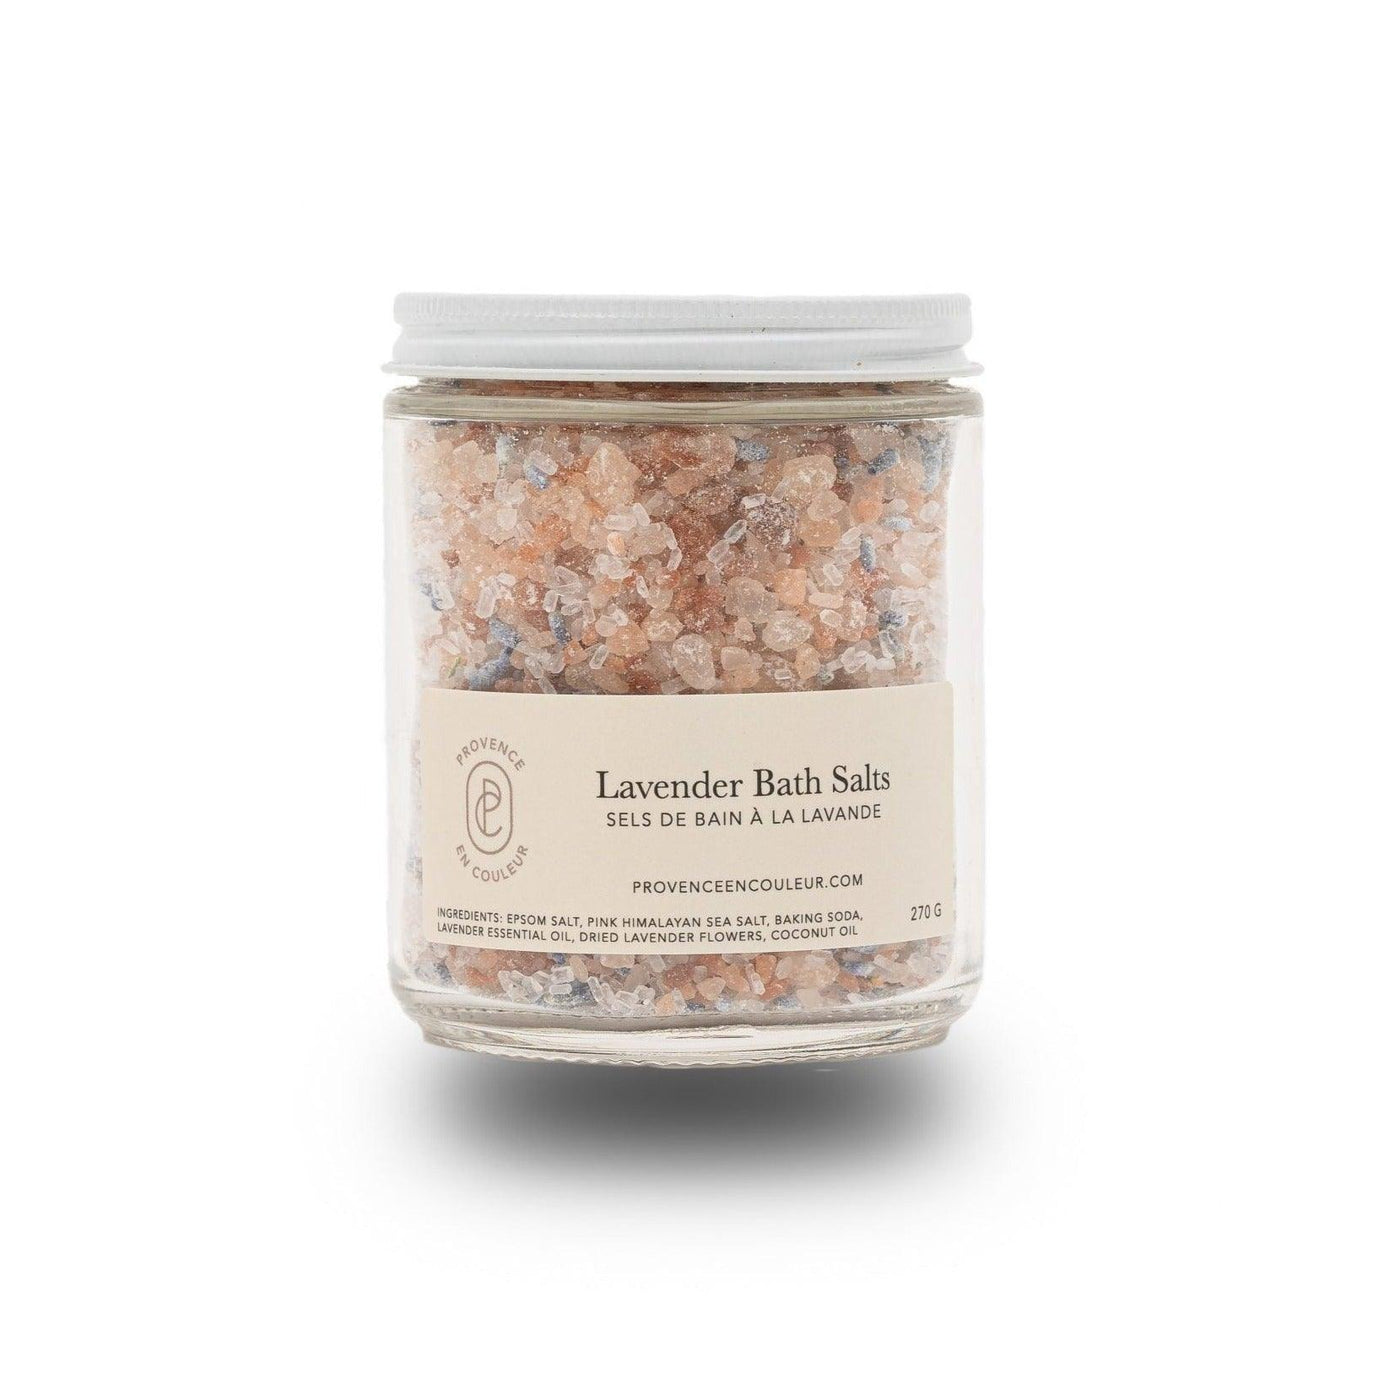 Close your eyes and drift away to the South of France, amidst the fields of Provence.   Immerse yourself in a luxurious and soothing bath with these beautiful bath salts blended with real lavender flowers. Enriched with lavender essential oil, these salts are perfect for soothing tired and aching muscles.  To create your own SPA ritual at home, sprinkle the salts in your bathtub for a relaxing, floral bath. Sit back, relax and enjoy.   Rinse with clean water.